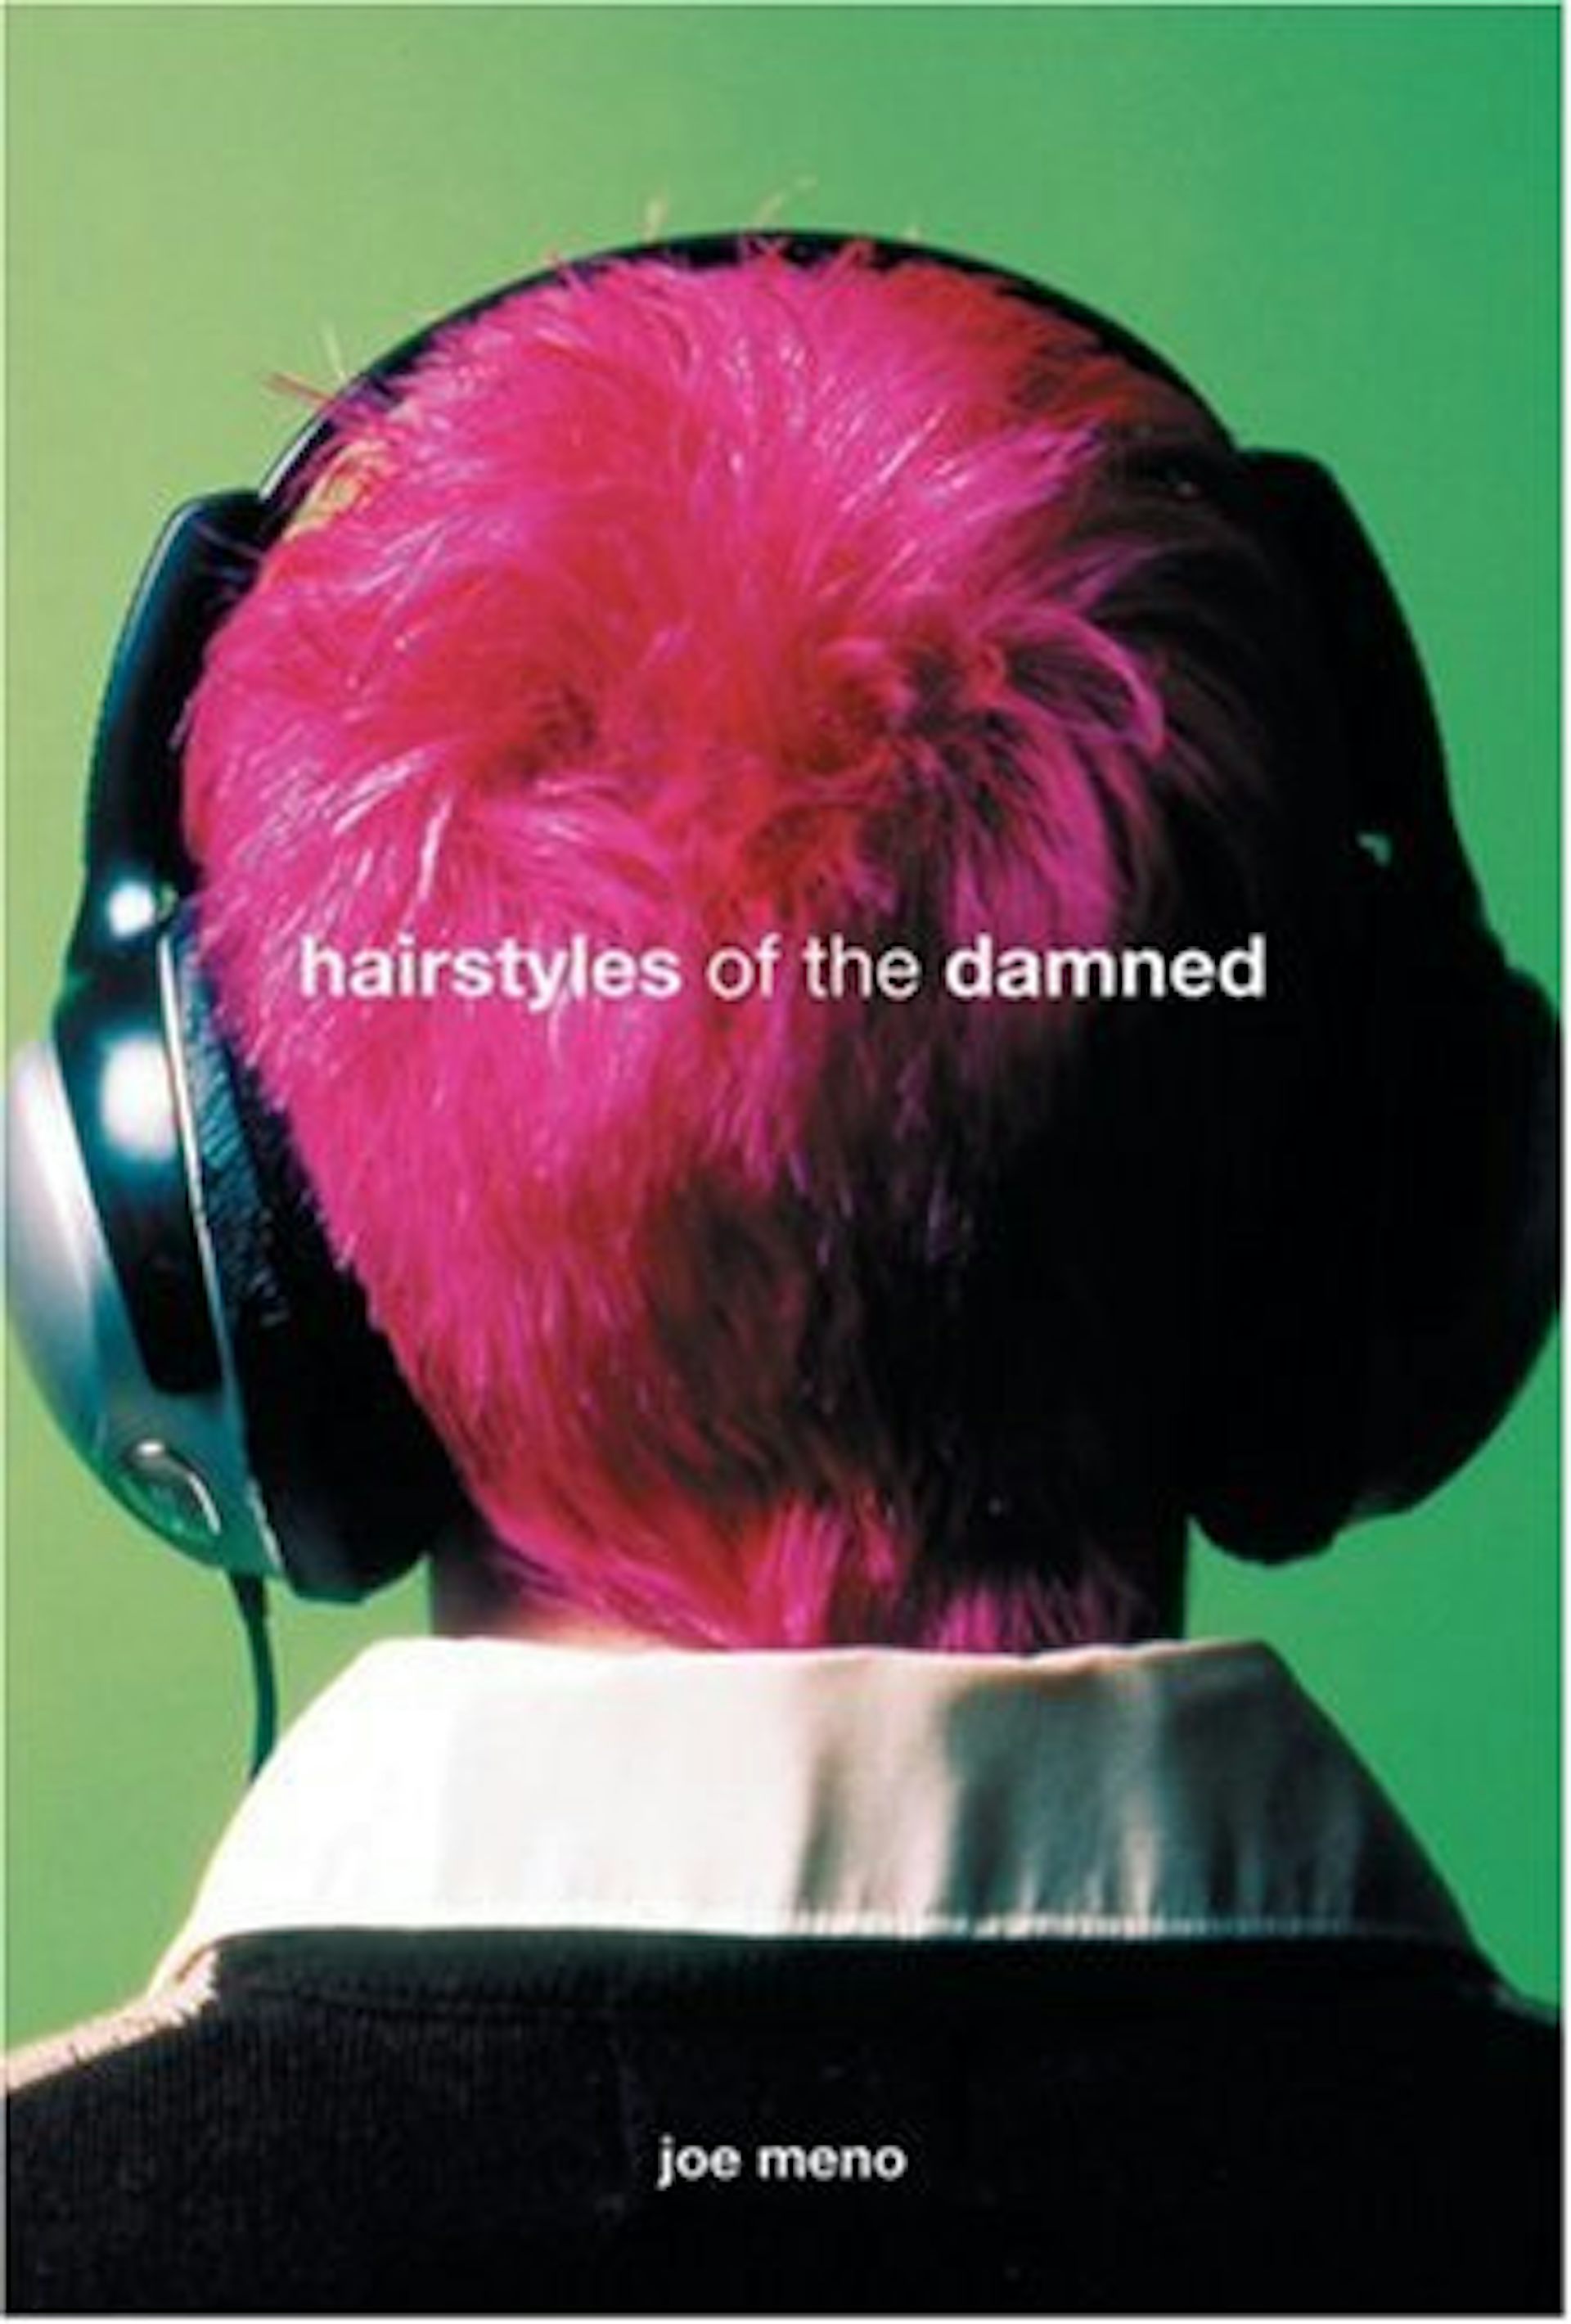 hairstyles of the damned by joe meno